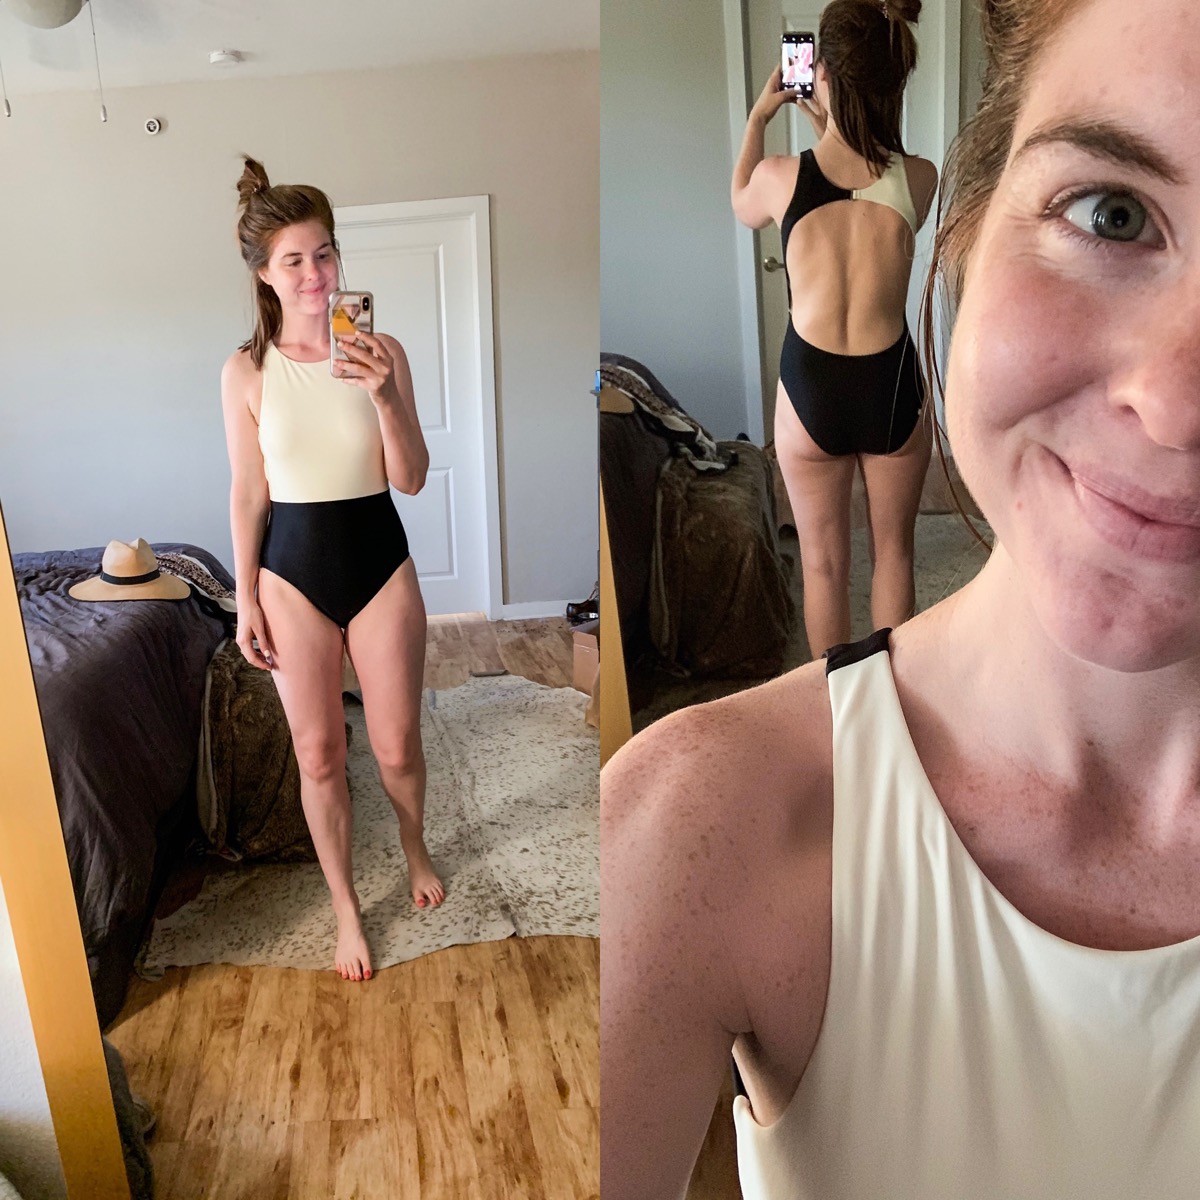 Summersalt Review 2020 - Cute Swimwear & Loungewear at an Affordable Price